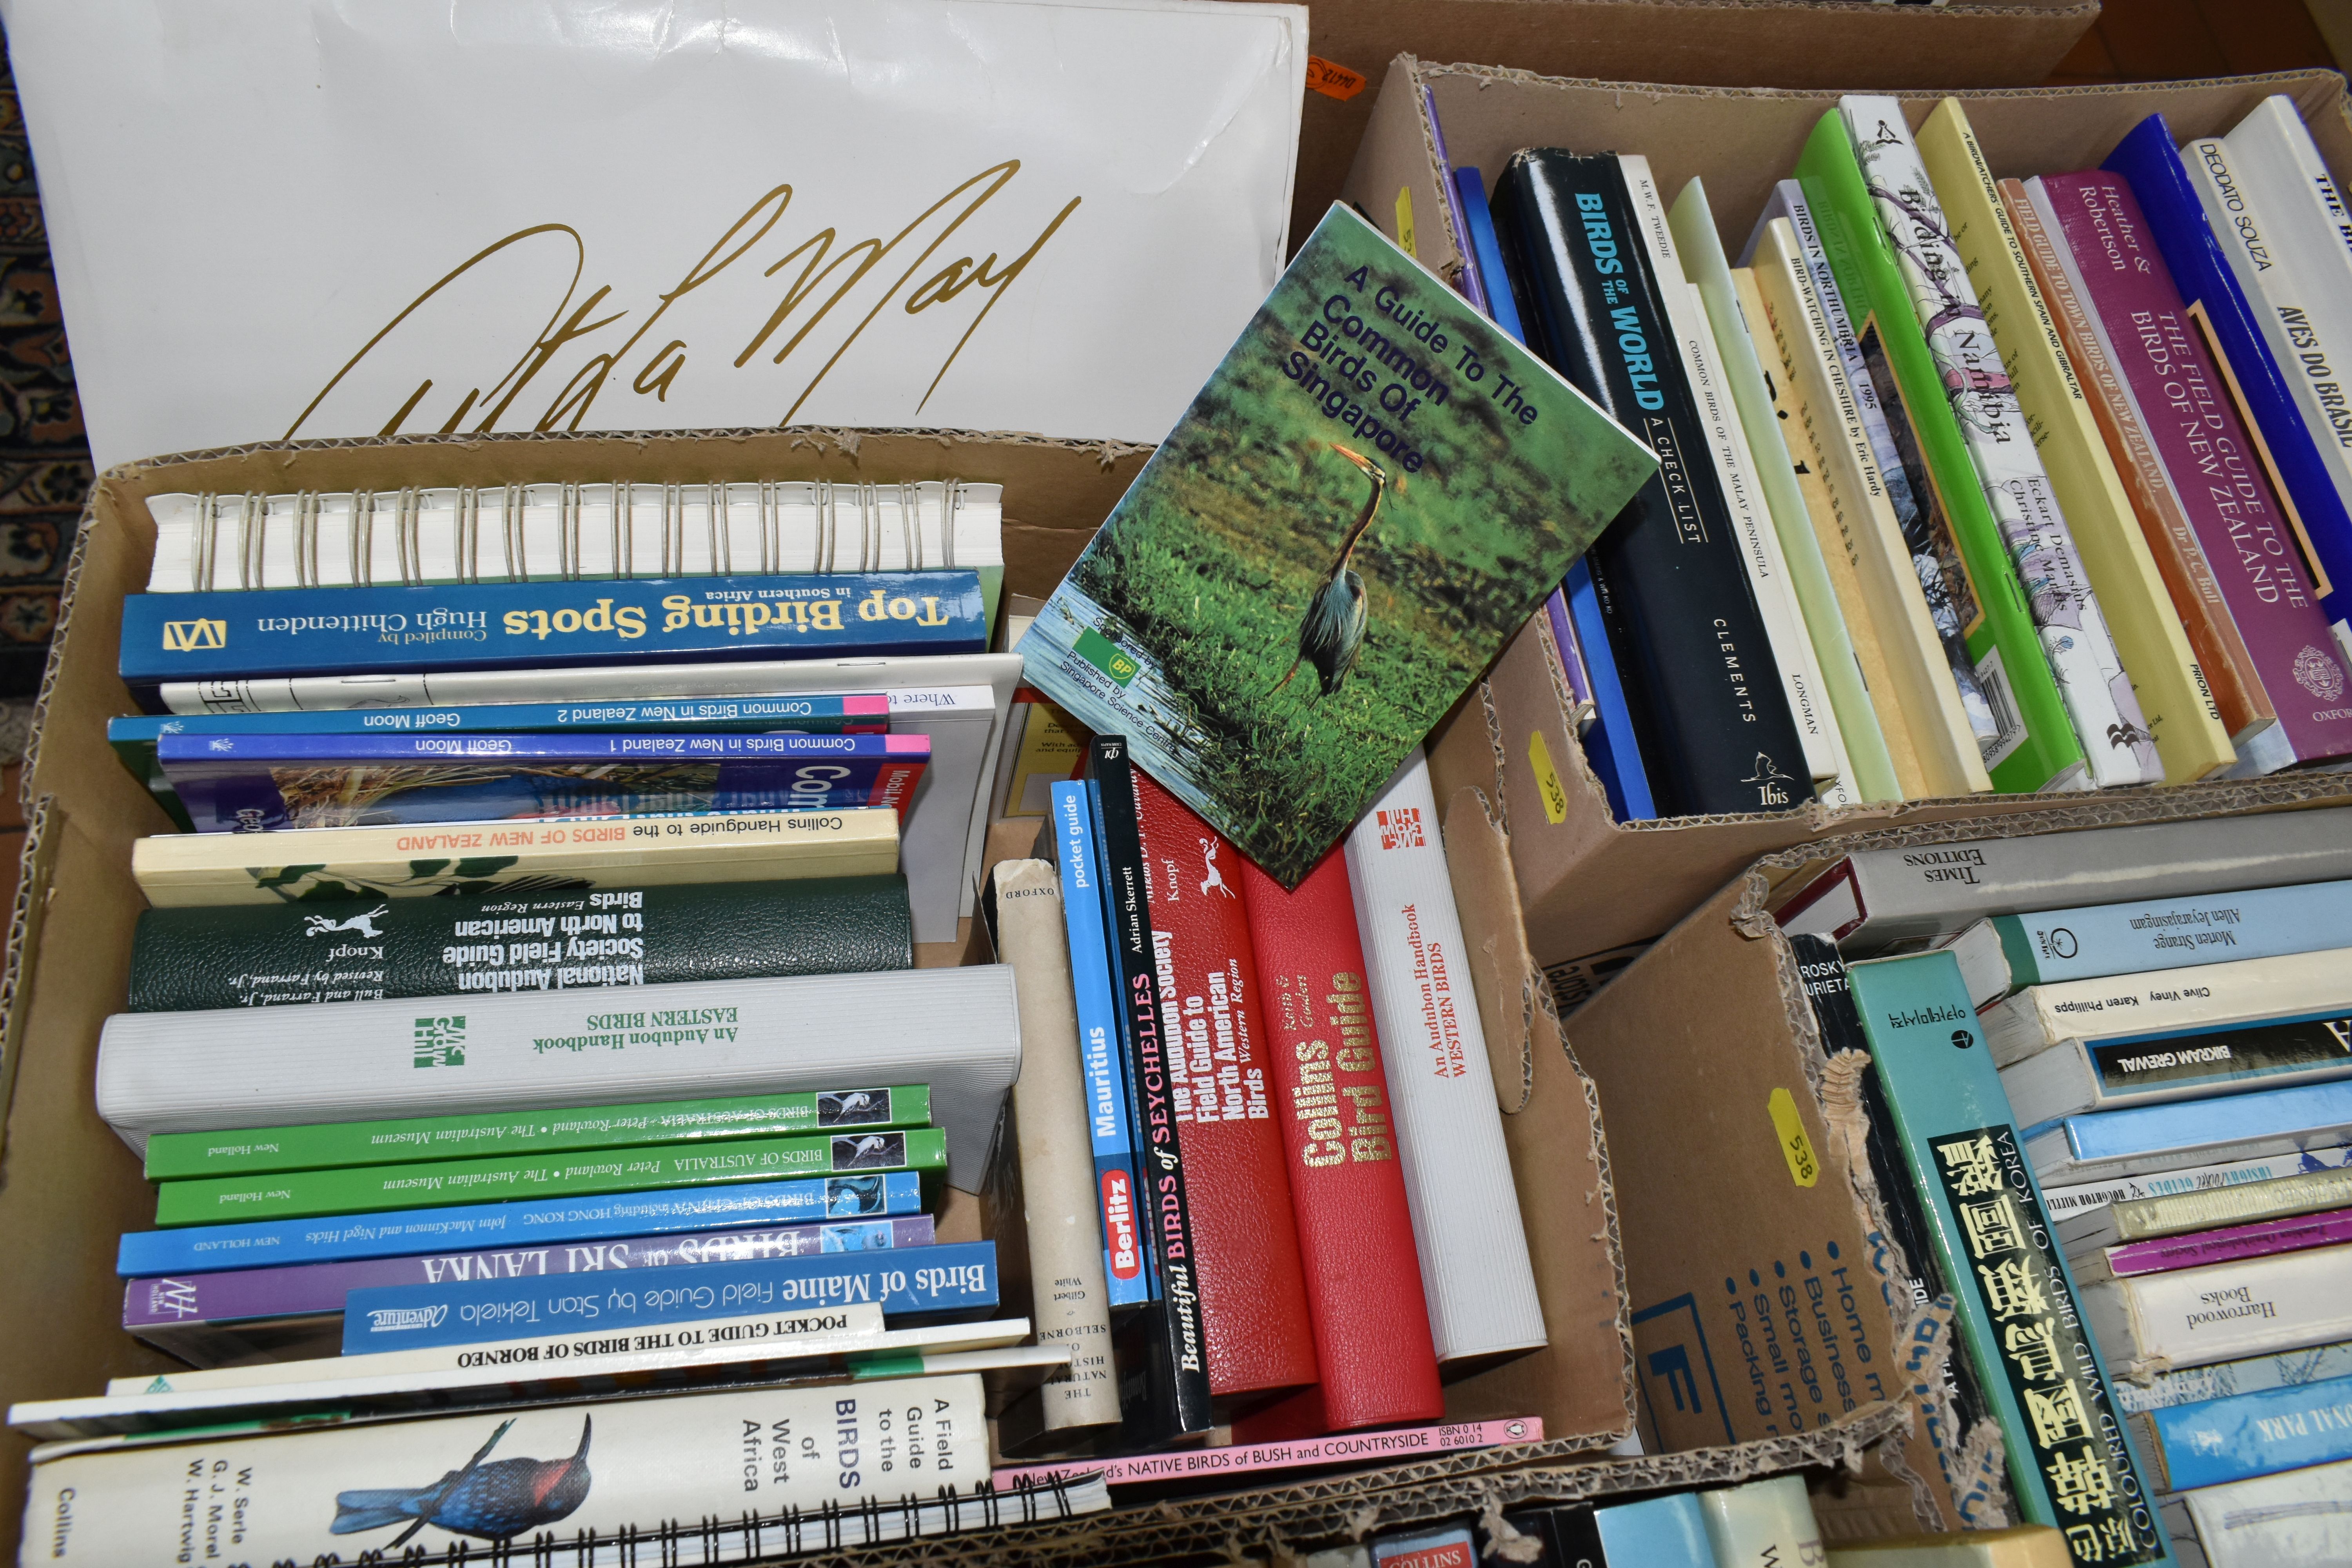 FIVE BOXES OF BOOKS containing approximately 125 titles in hardback and paperback formats on the - Image 3 of 6